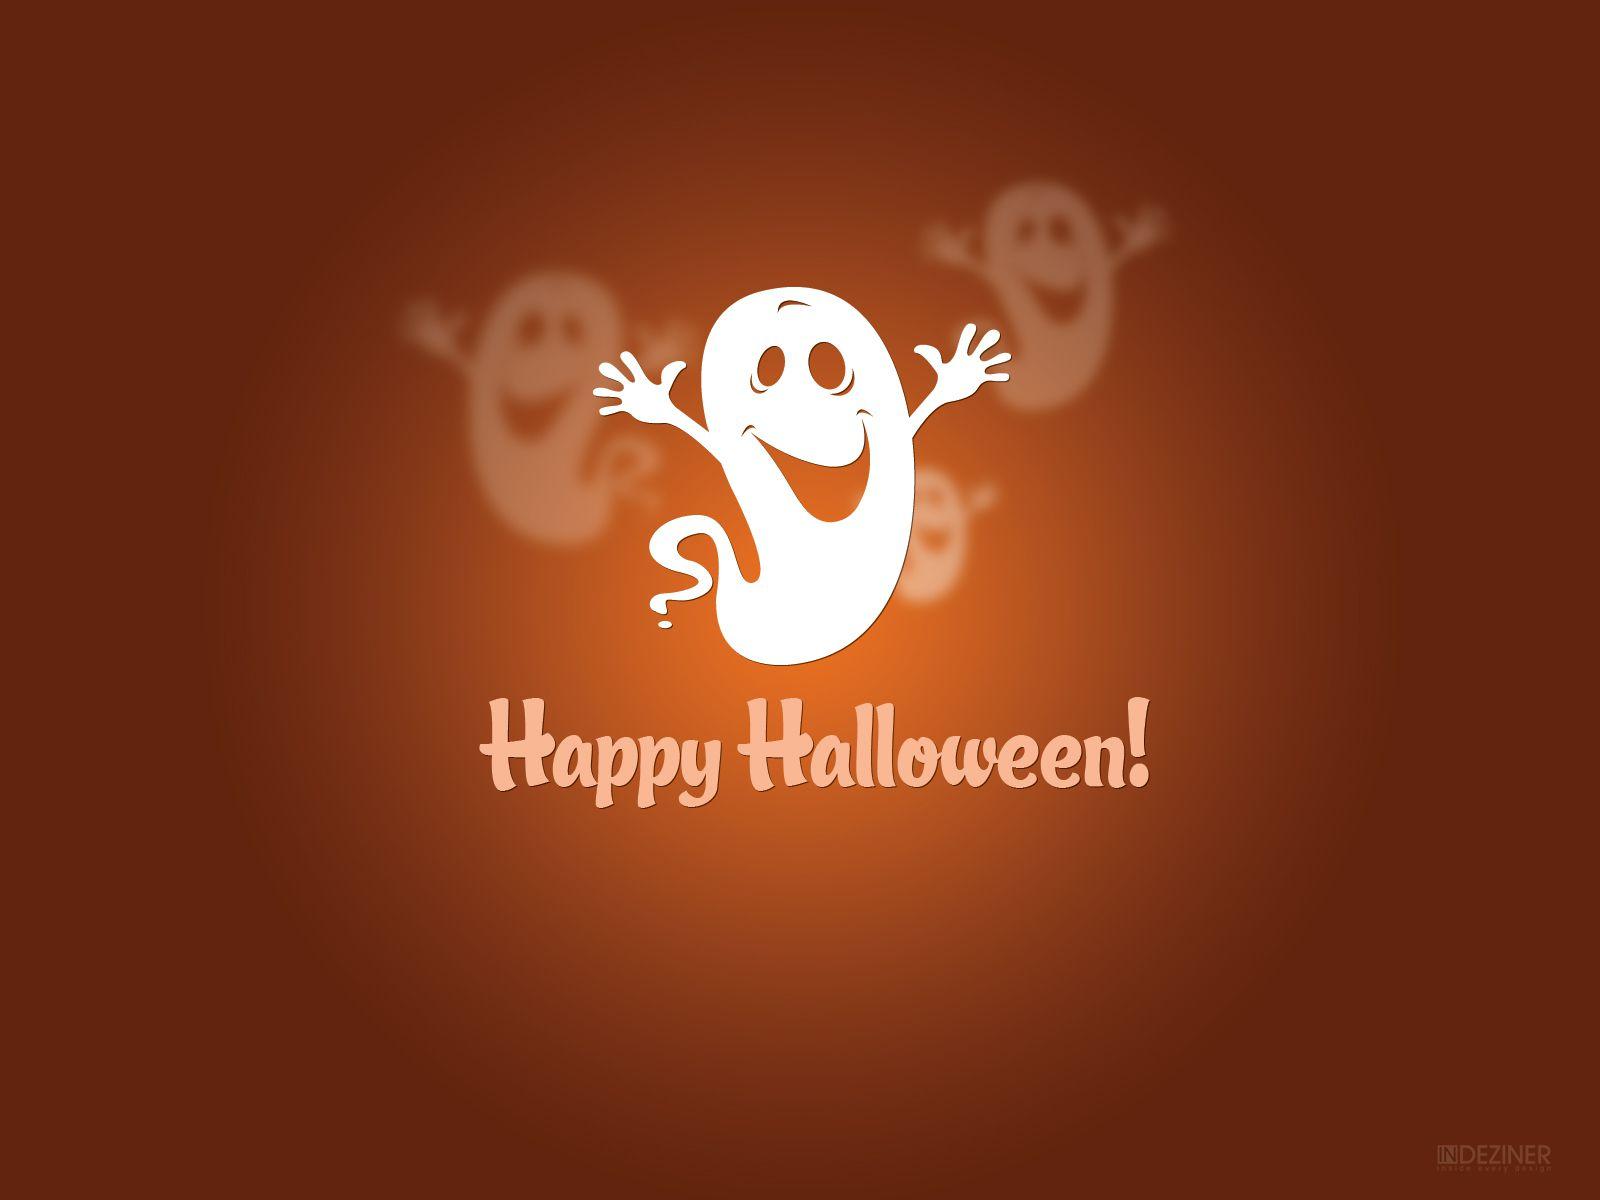 45 Spooky and Fun Halloween Wallpapers